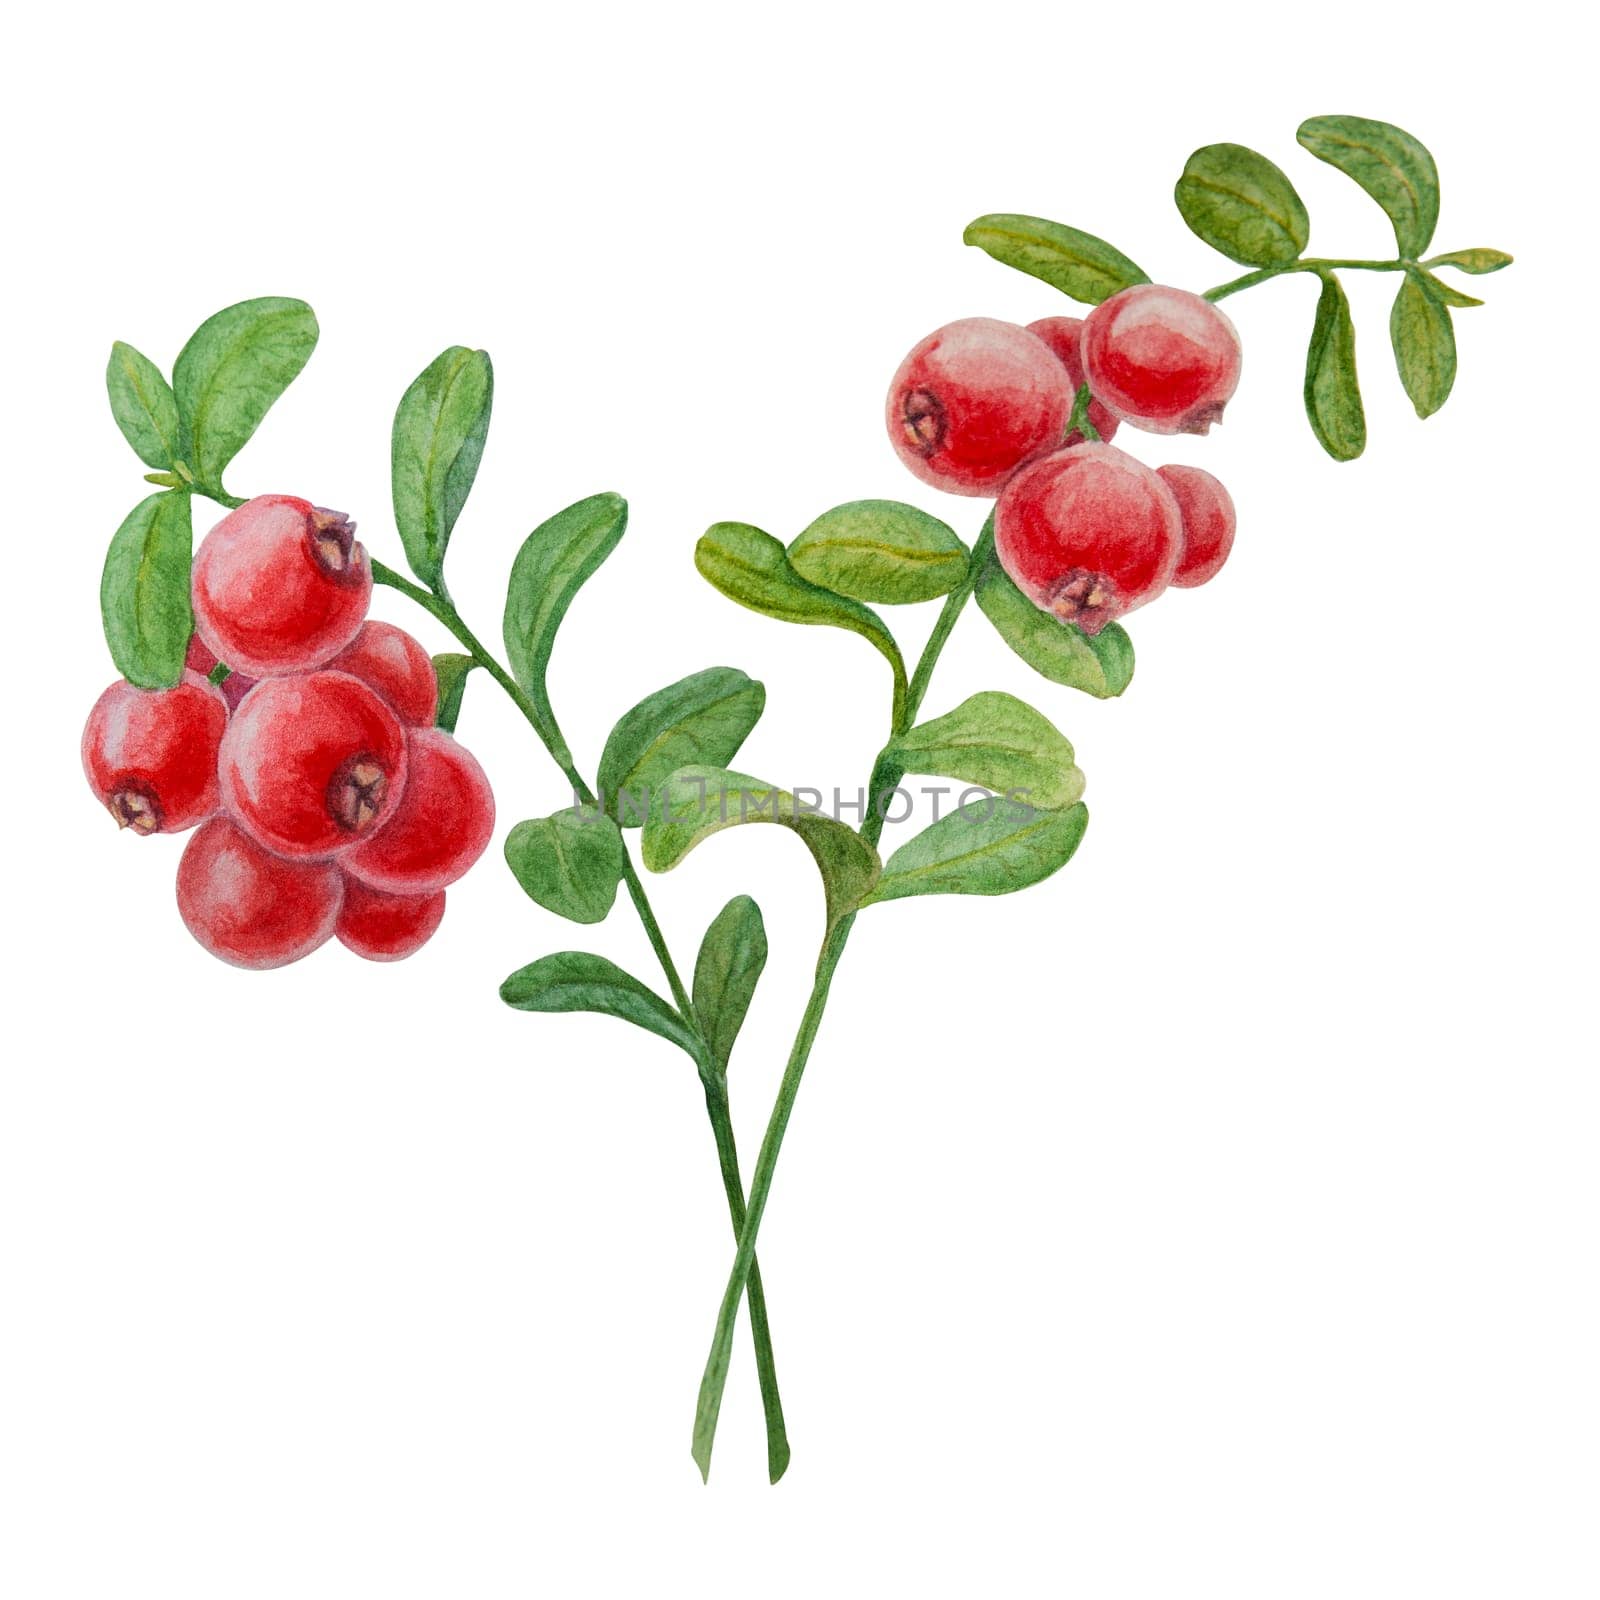 Wild red berries watercolor hand drawn botanical realistic illustration. Forest cranberry, cowberry branch isolated on white background.Great for printing on fabric, postcards, invitations, menus